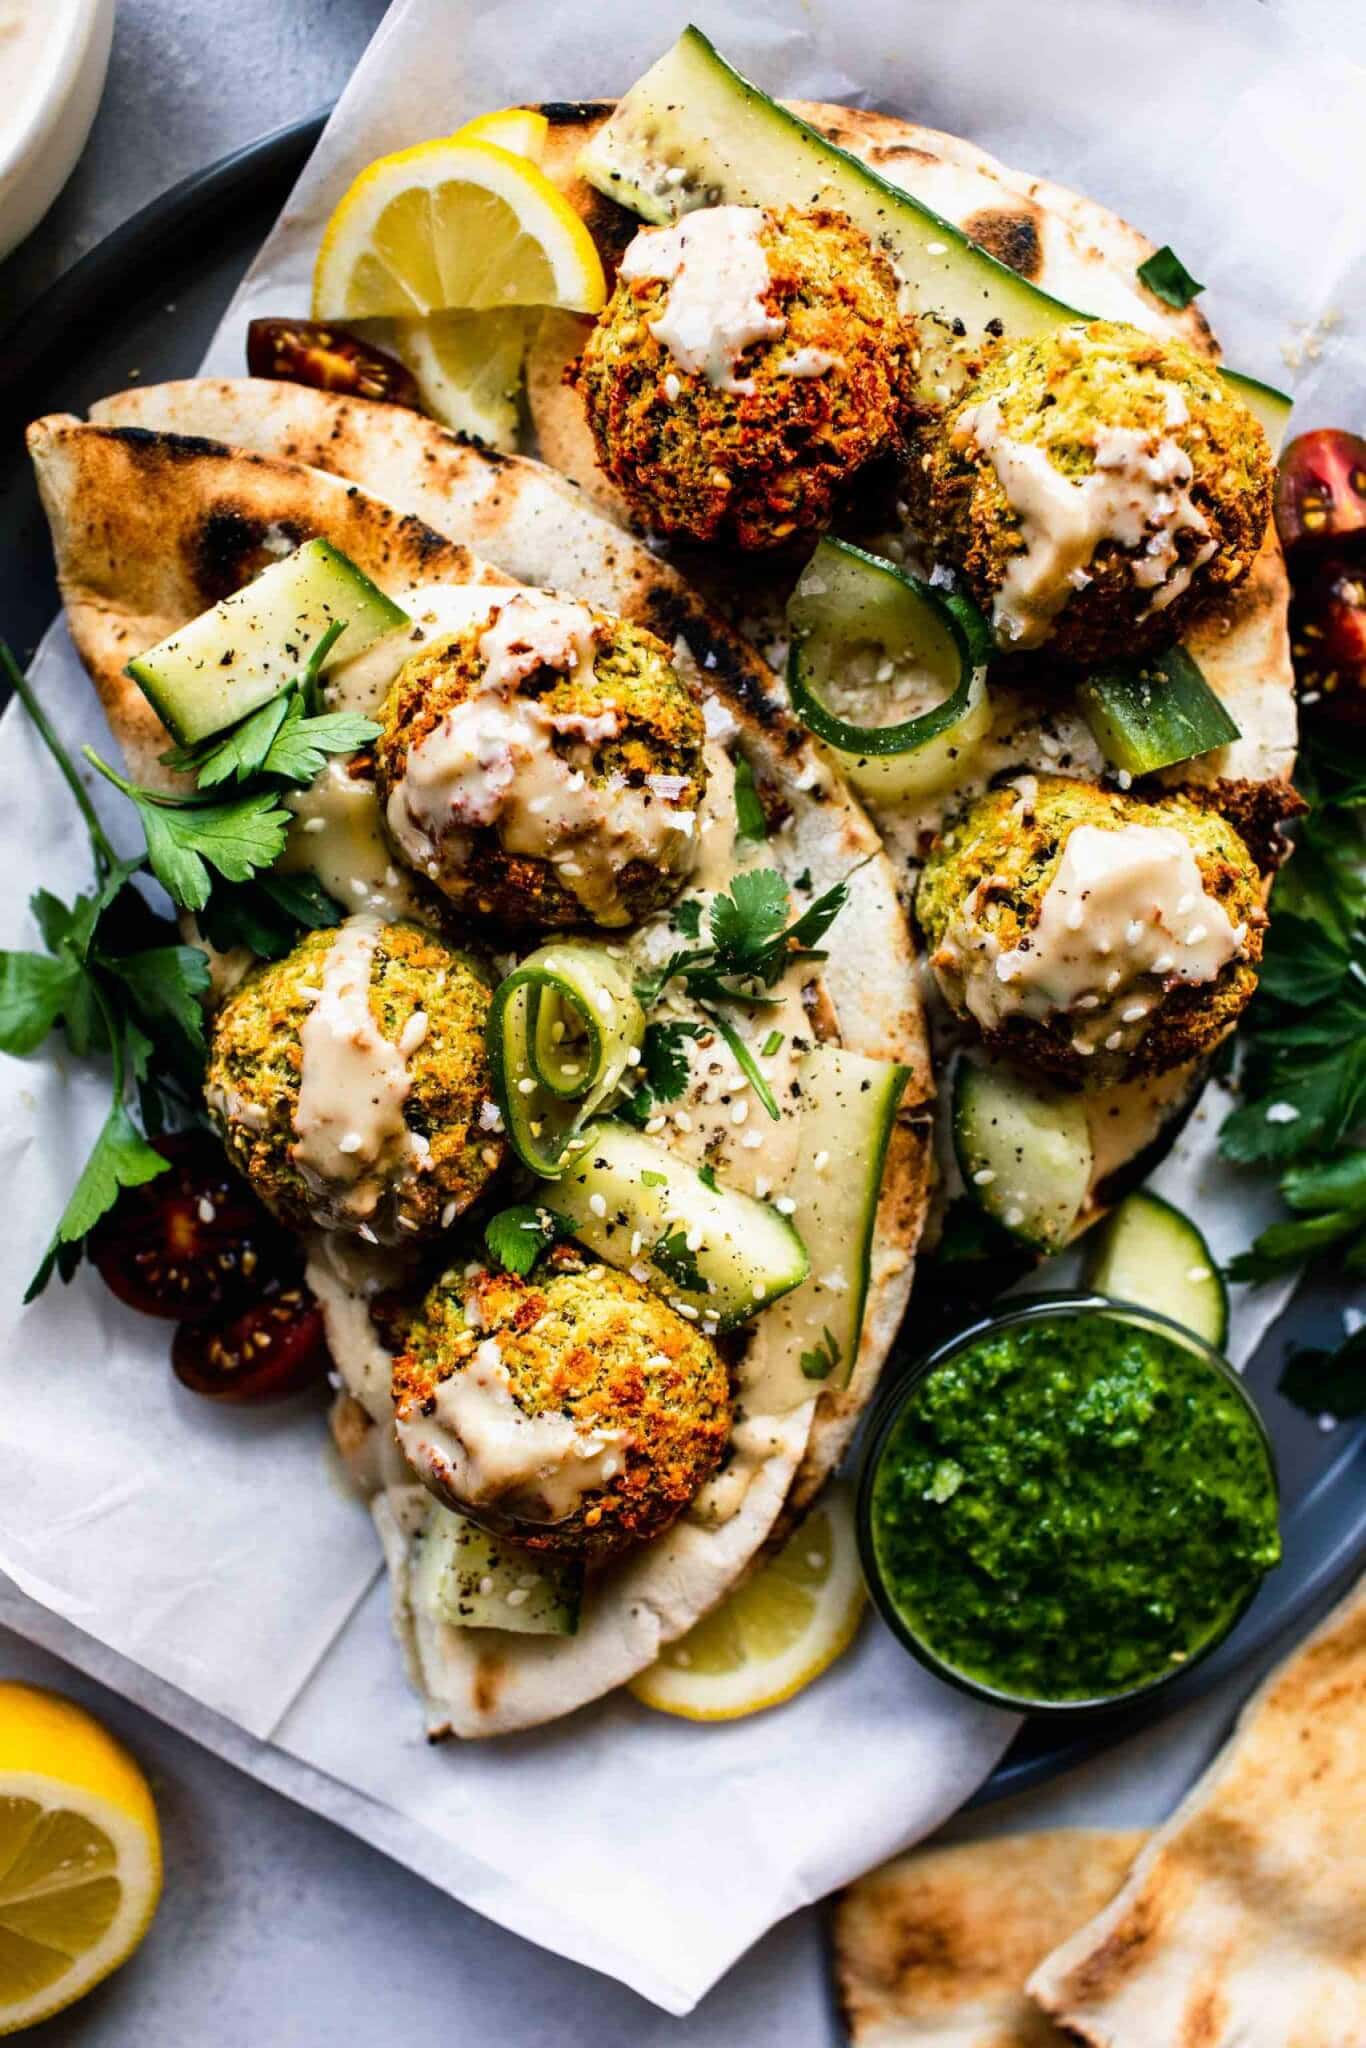 Falafel balls stuffed into pita with ribbons of cucumber, hummus and green sauce.